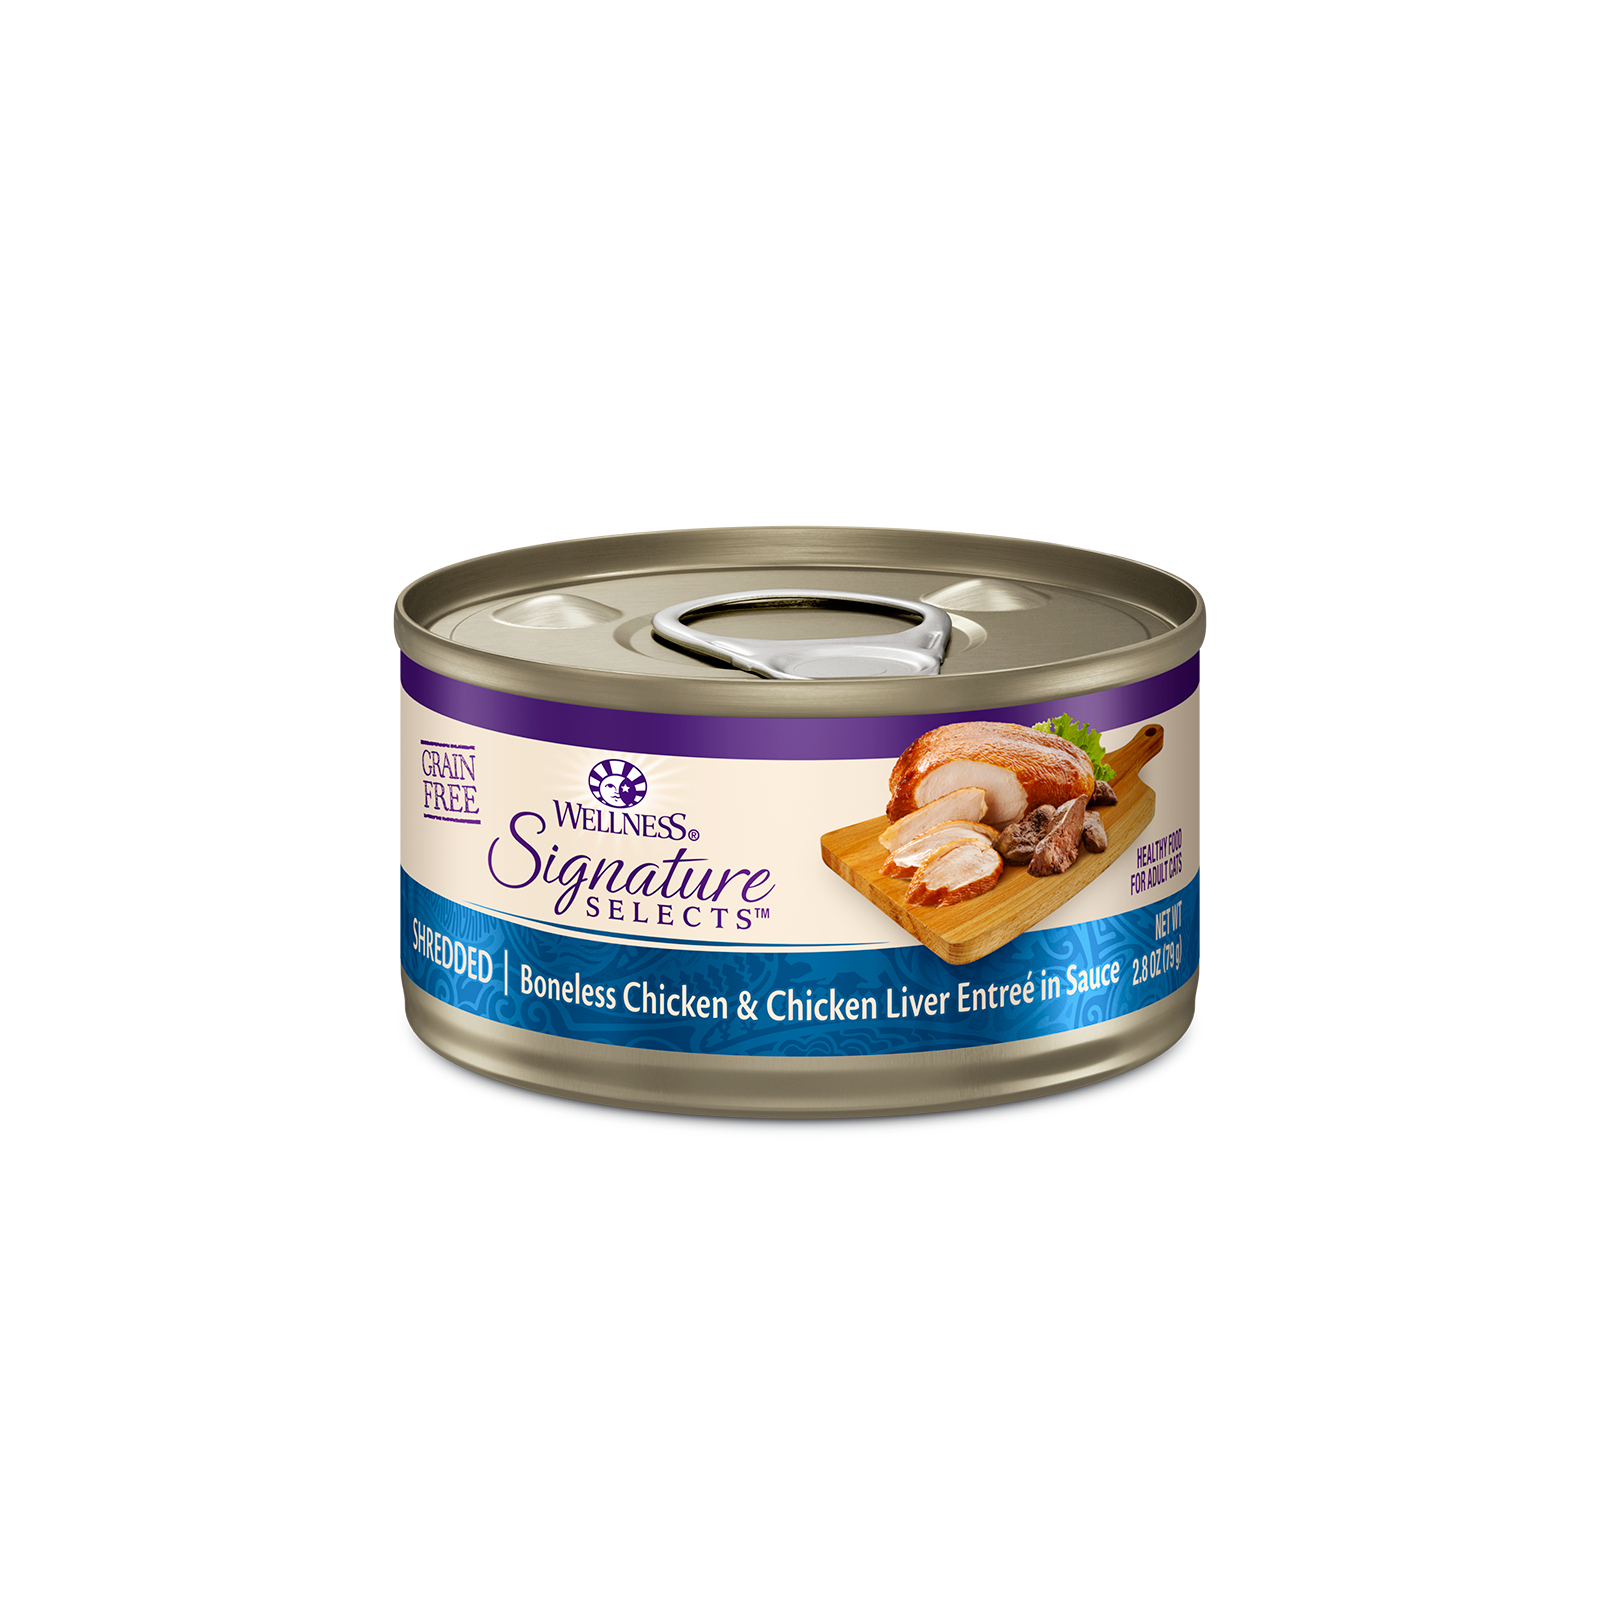 Wellness CORE Signature Selects Cat Food Can Adult Shredded Boneless Chicken & Chicken Liver Entreé